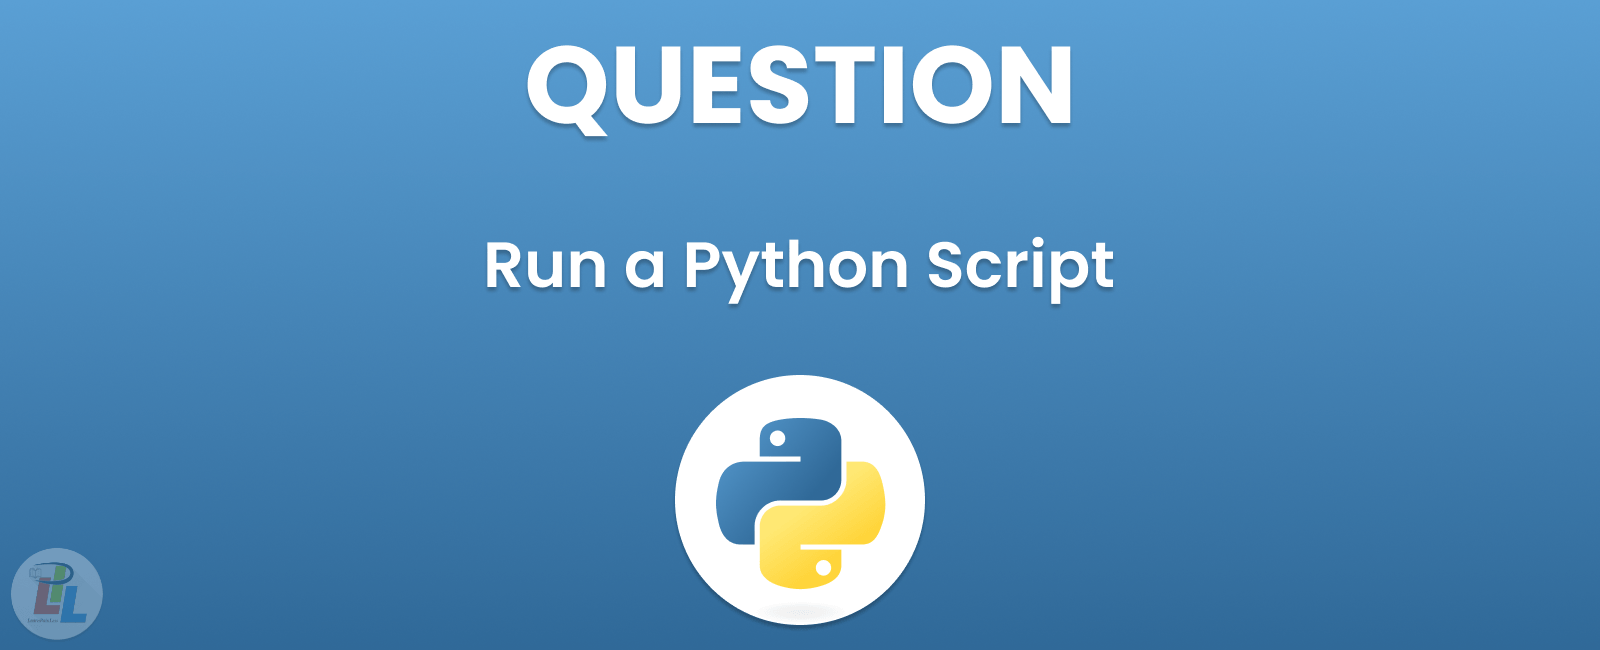 How to Run a Python Script: Step-by-Step